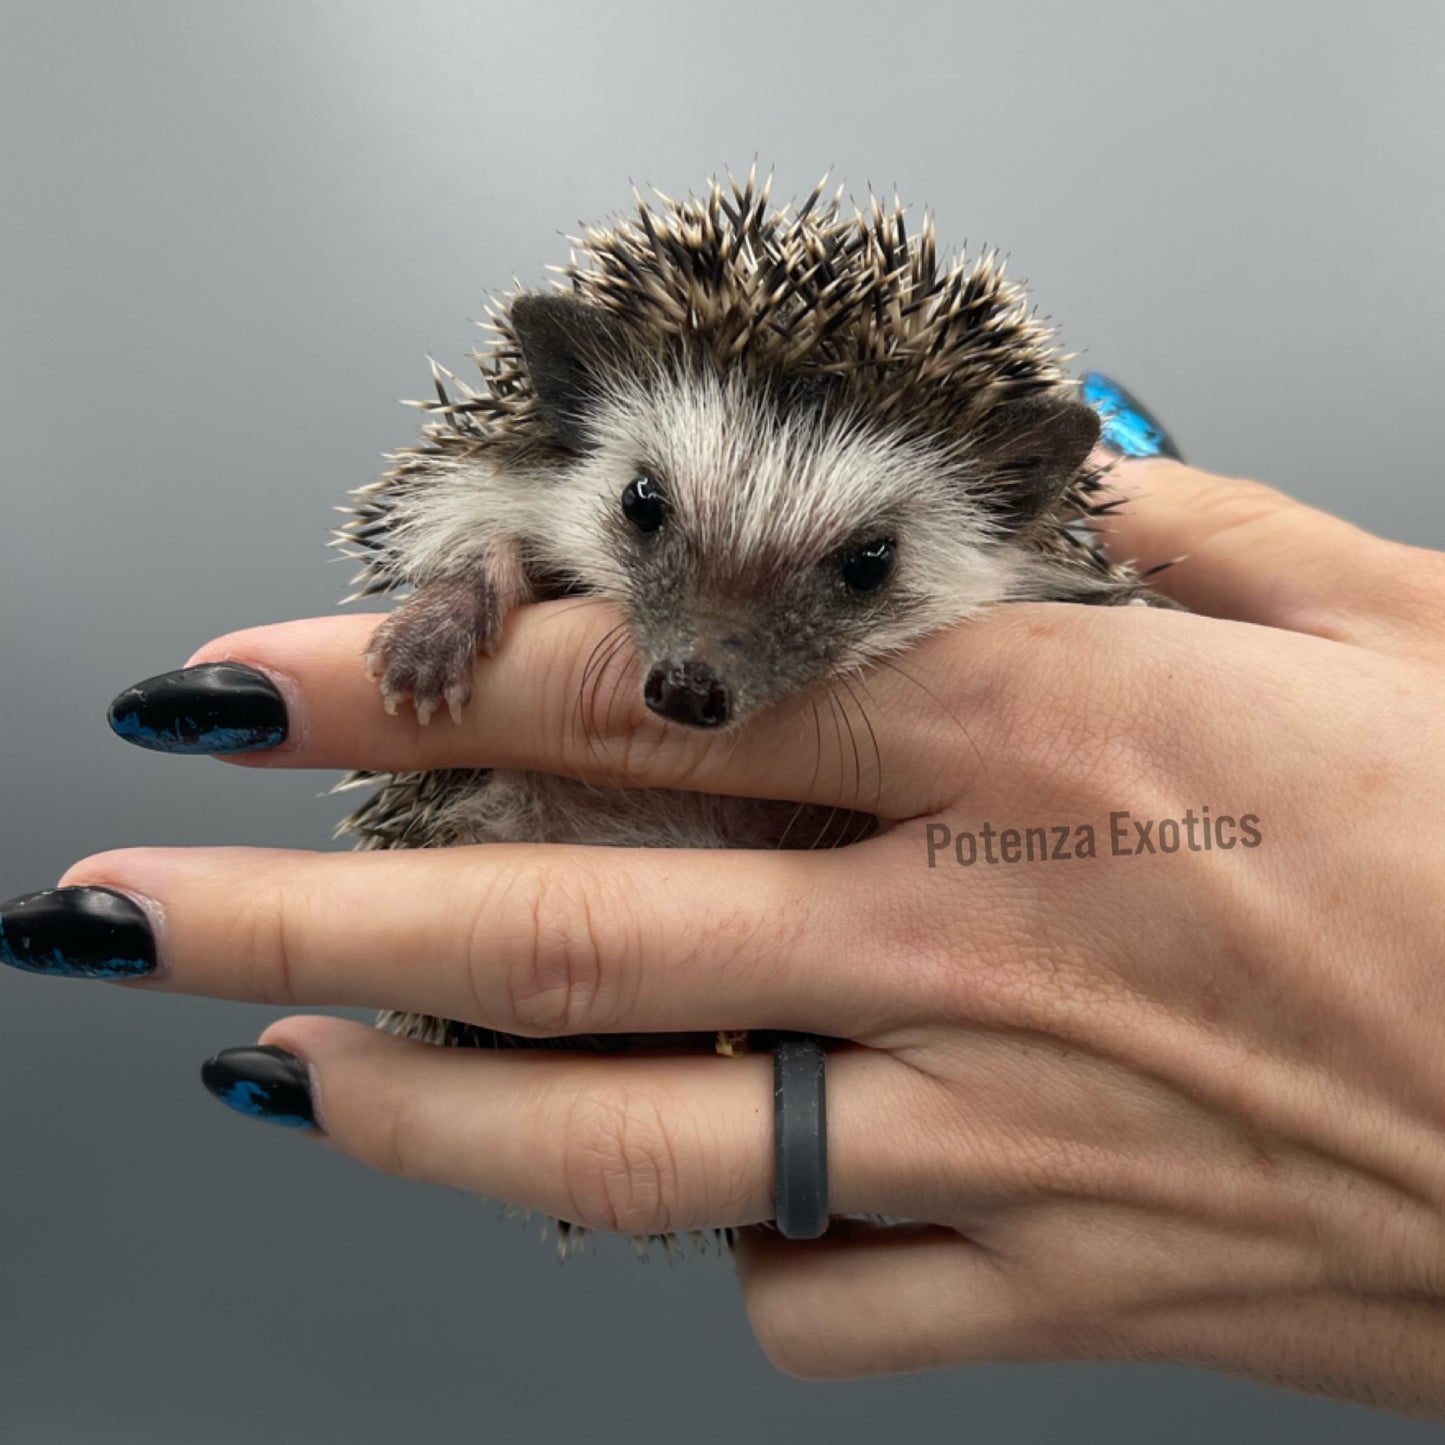 Hedgehogs for Sale